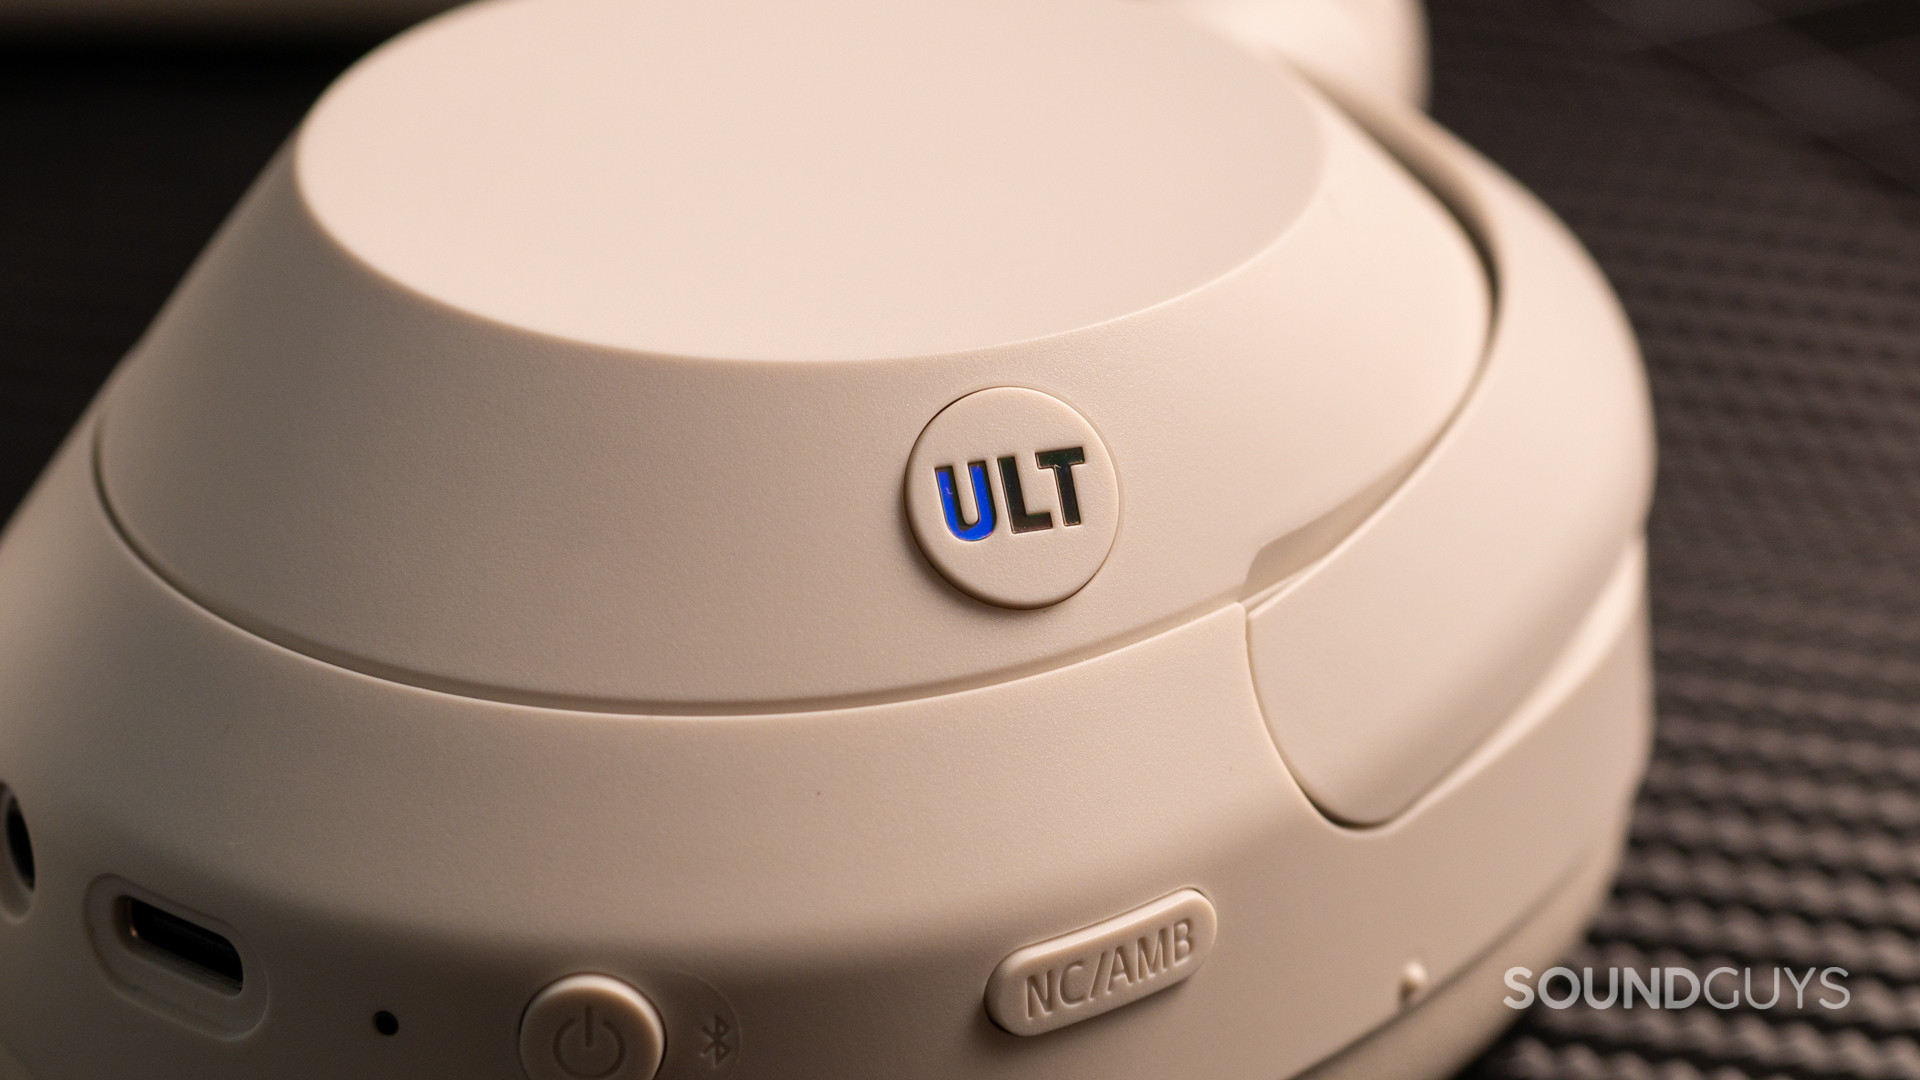 A photo of the button control cluster of the Sony ULT WEAR.